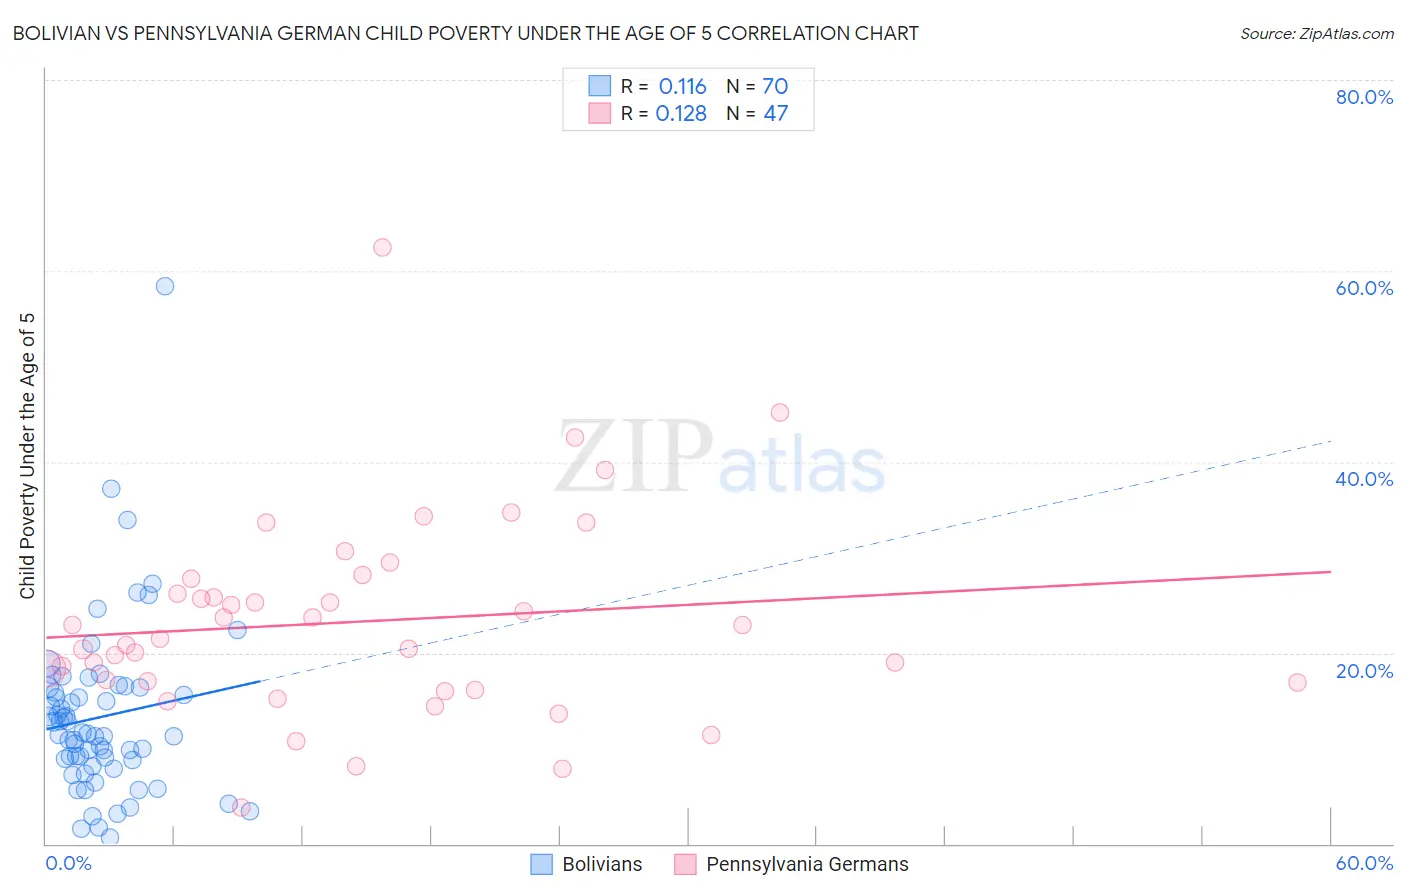 Bolivian vs Pennsylvania German Child Poverty Under the Age of 5